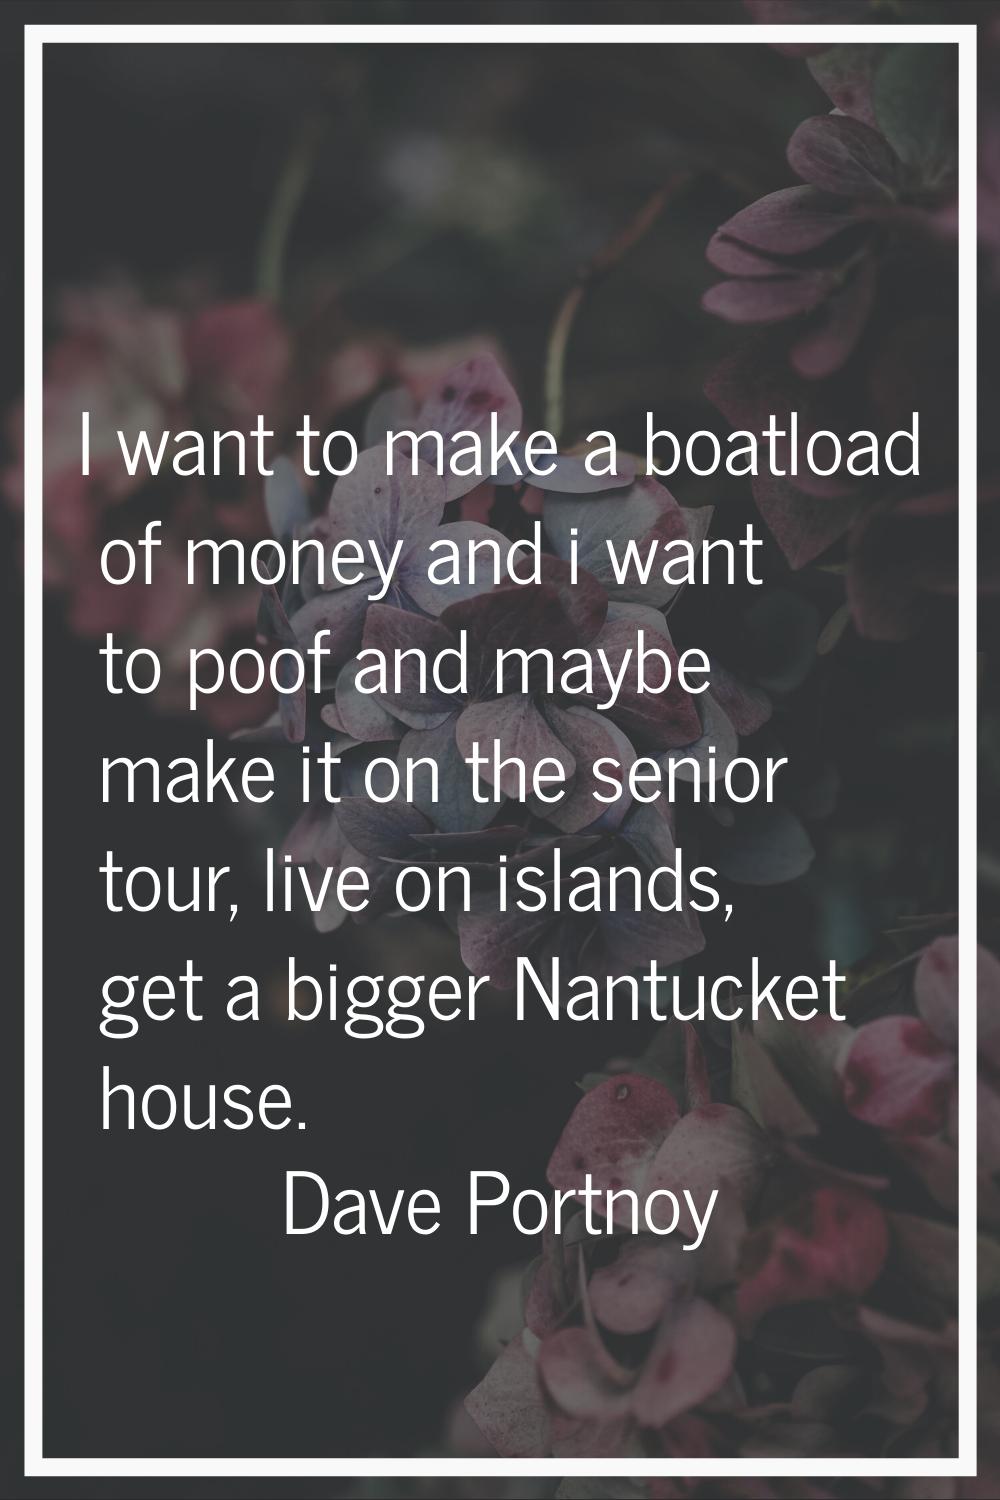 I want to make a boatload of money and i want to poof and maybe make it on the senior tour, live on